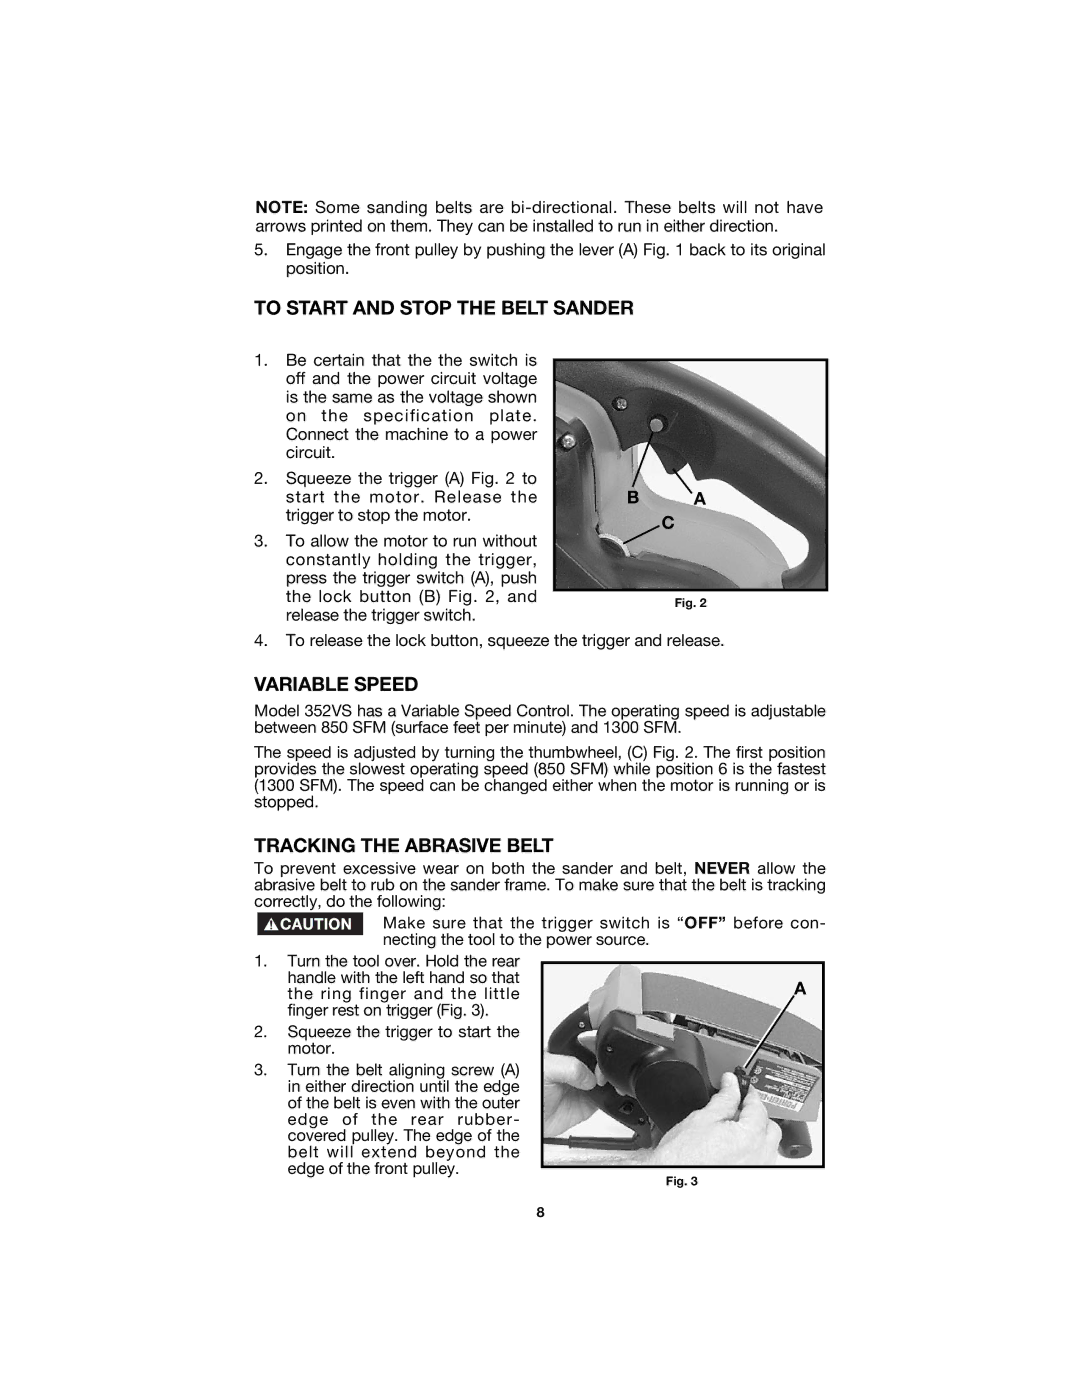 Porter-Cable 352VS instruction manual To Start and Stop the Belt Sander, Variable Speed, Tracking the Abrasive Belt 